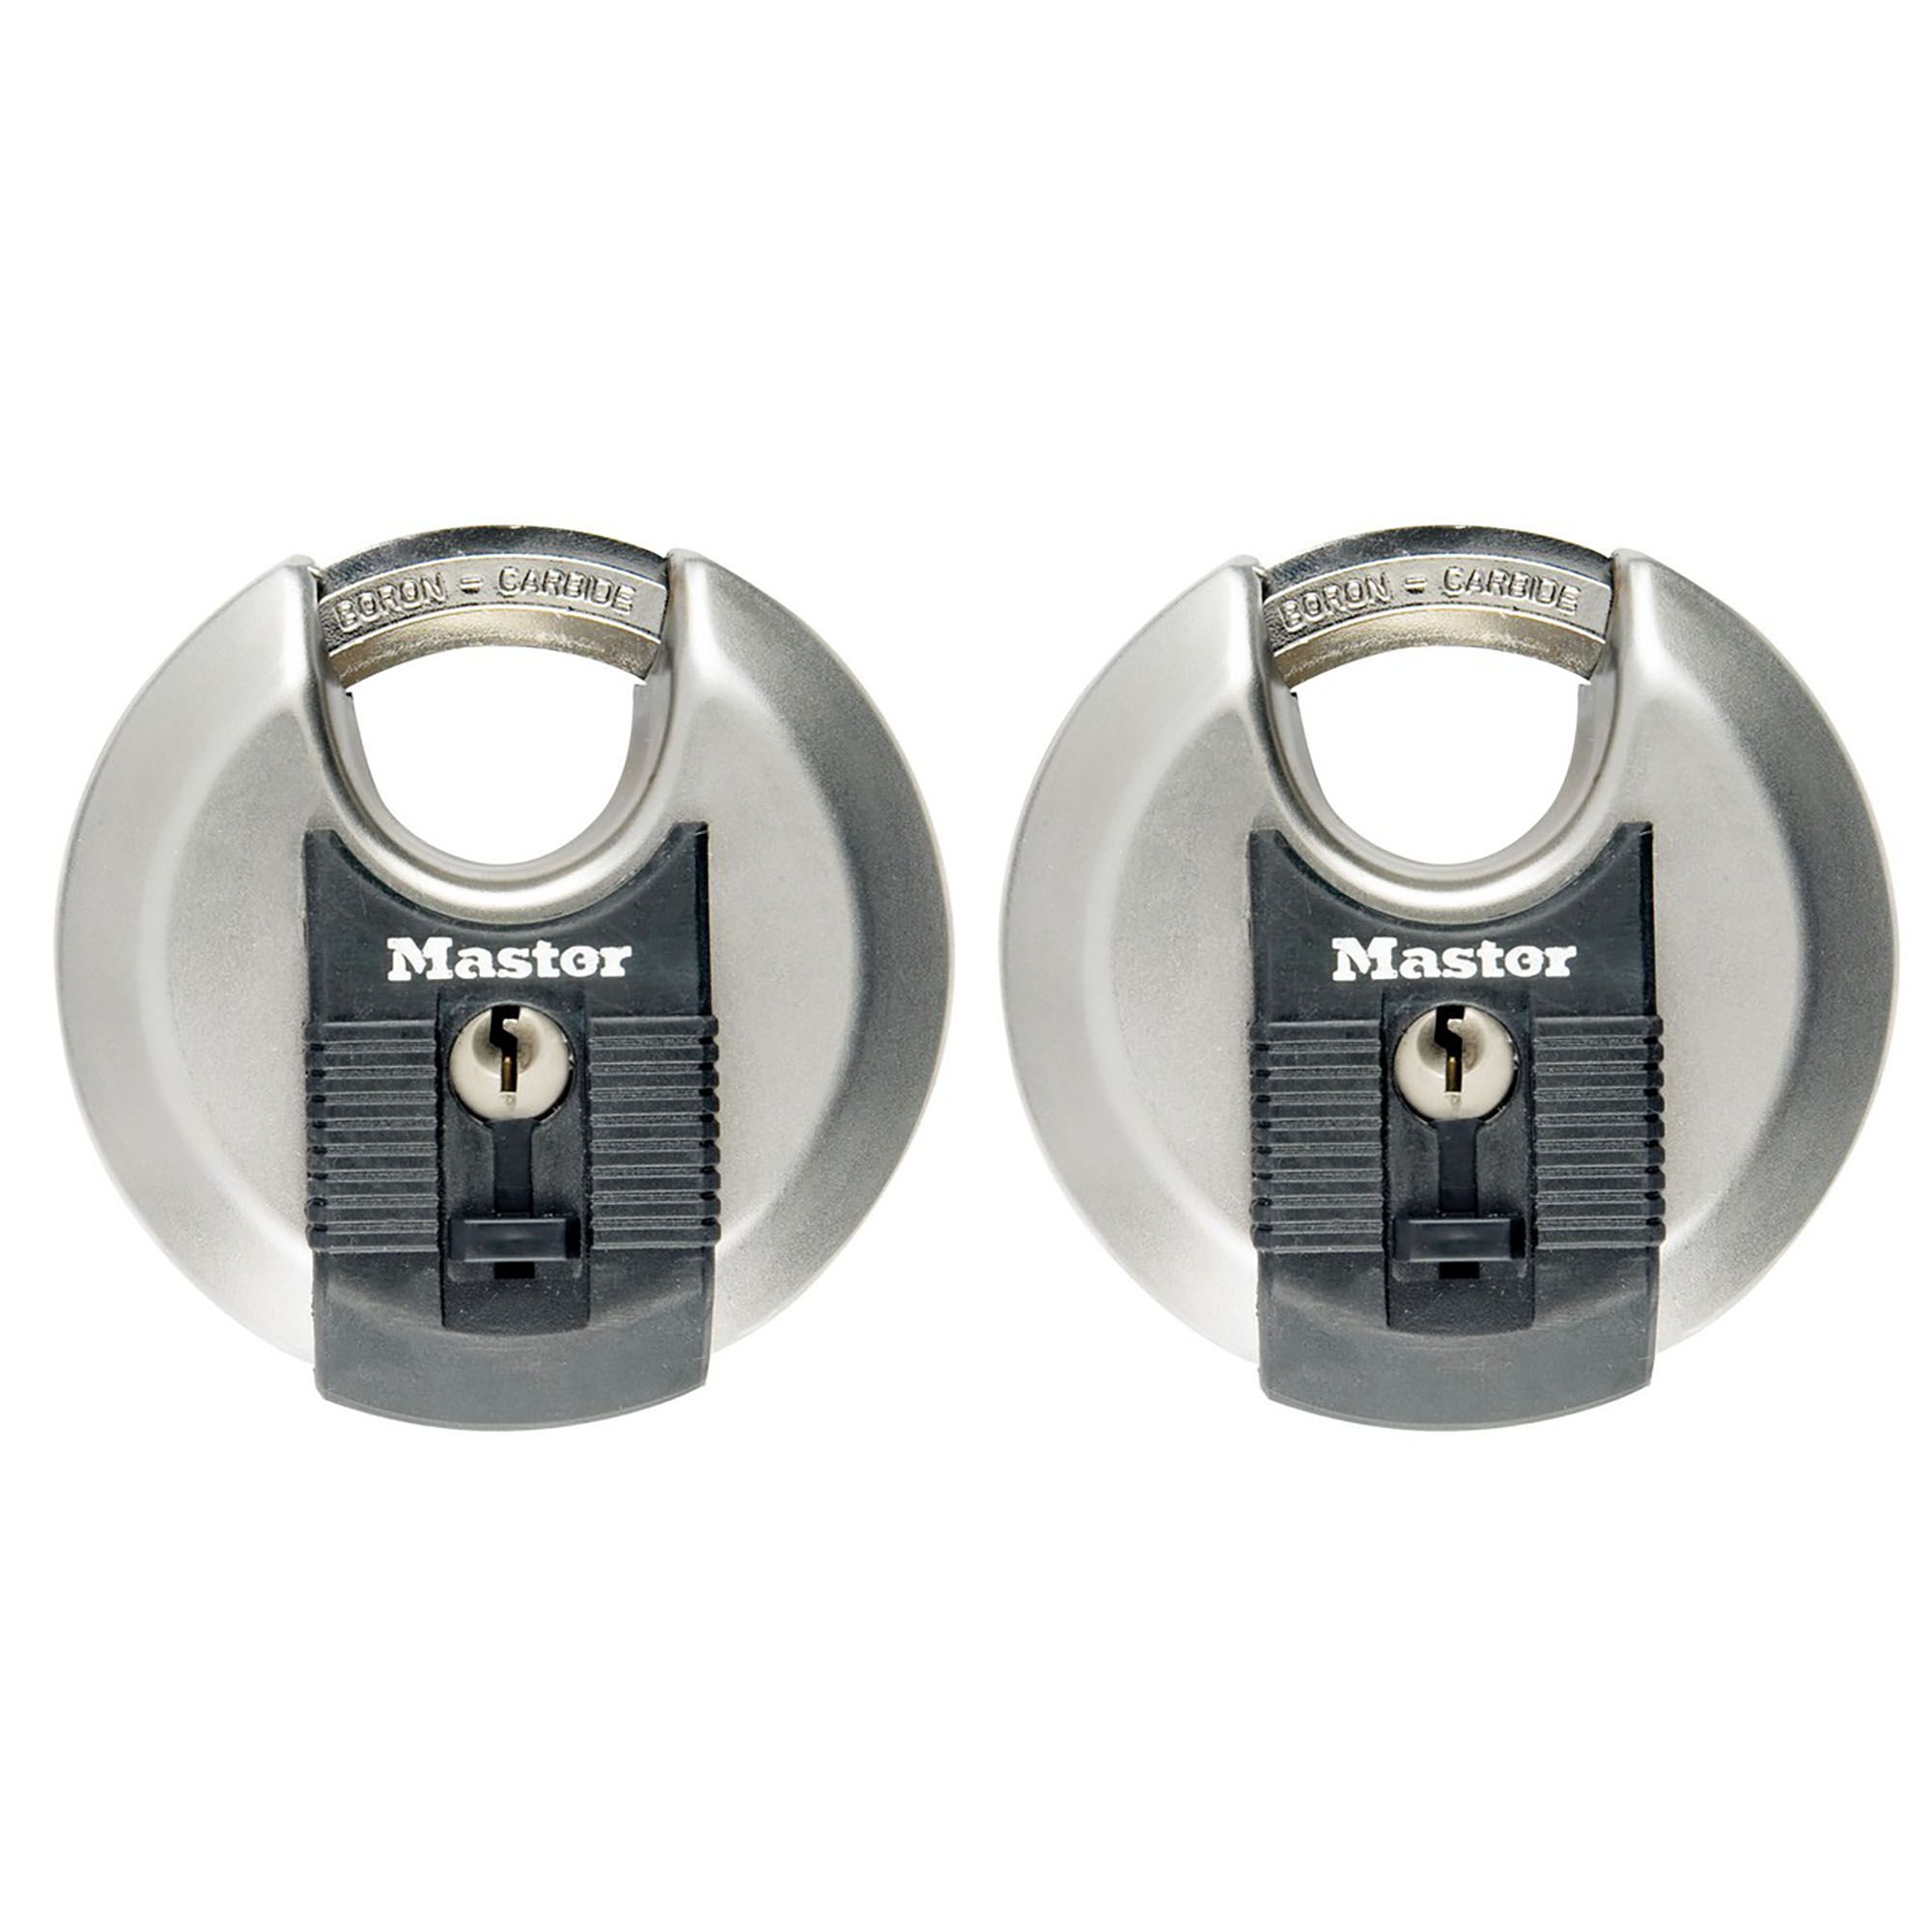 Master Lock Weather tough Heavy duty Stainless steel Metallic Closed shackle Disc Padlock (W)70mm, Pack of 2